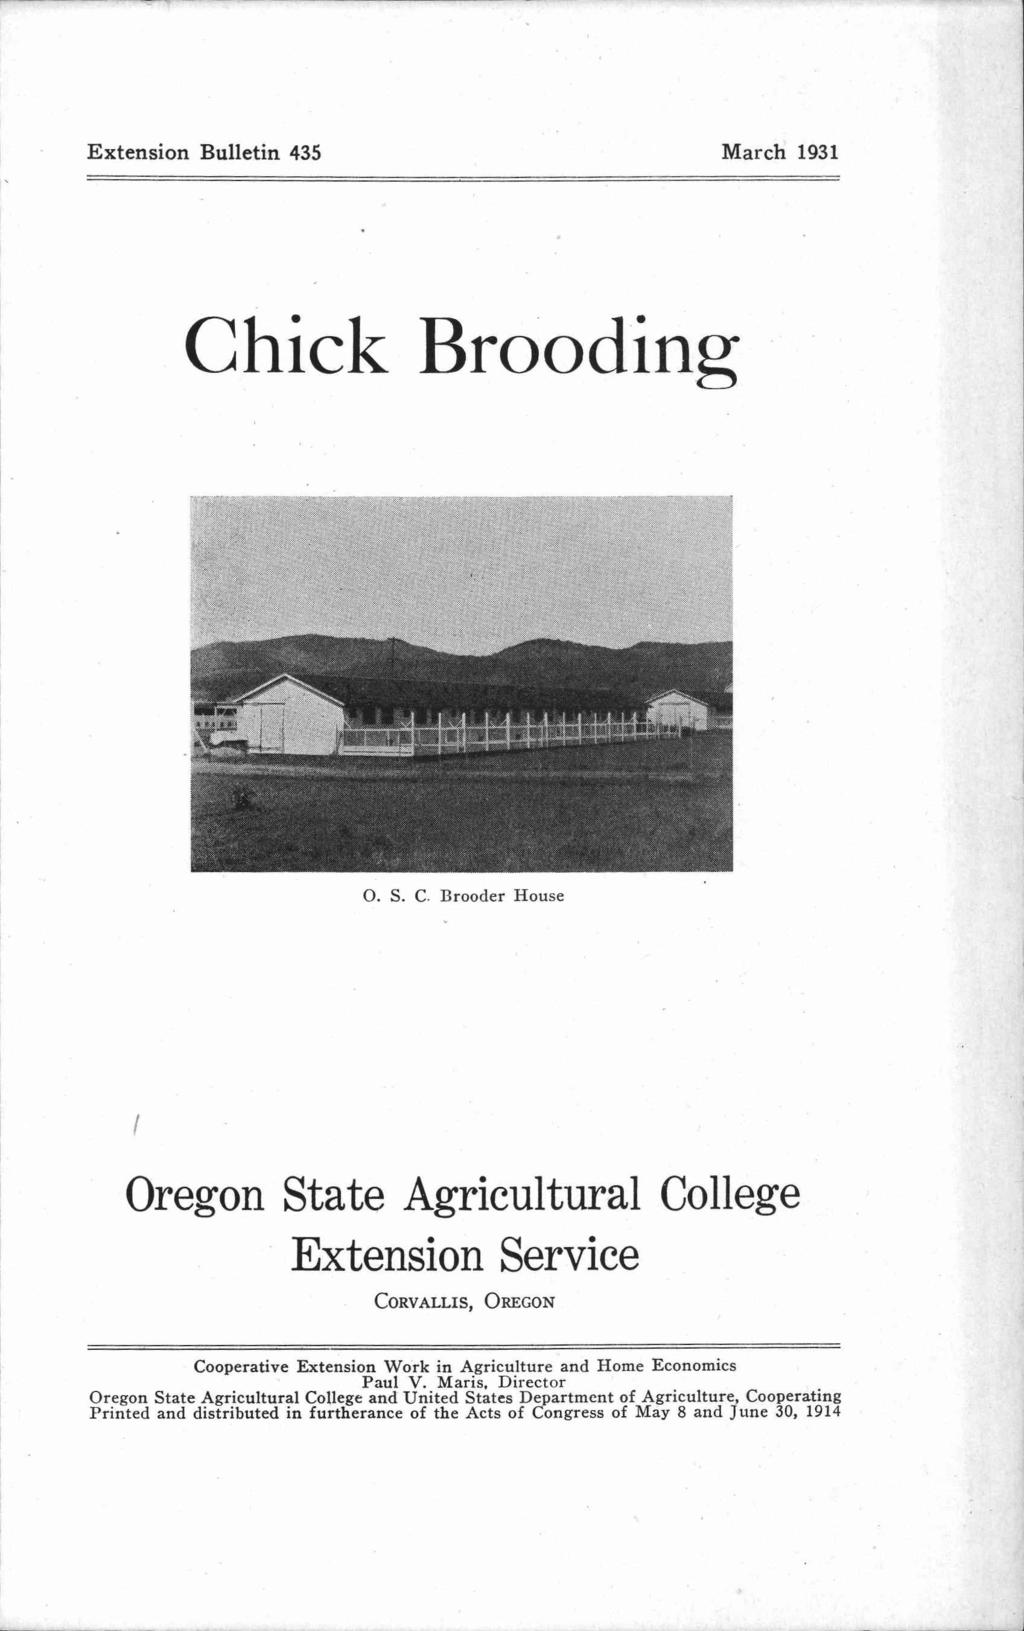 Extension Bulletin 435 March 1931 Chick Brooding 0. S.